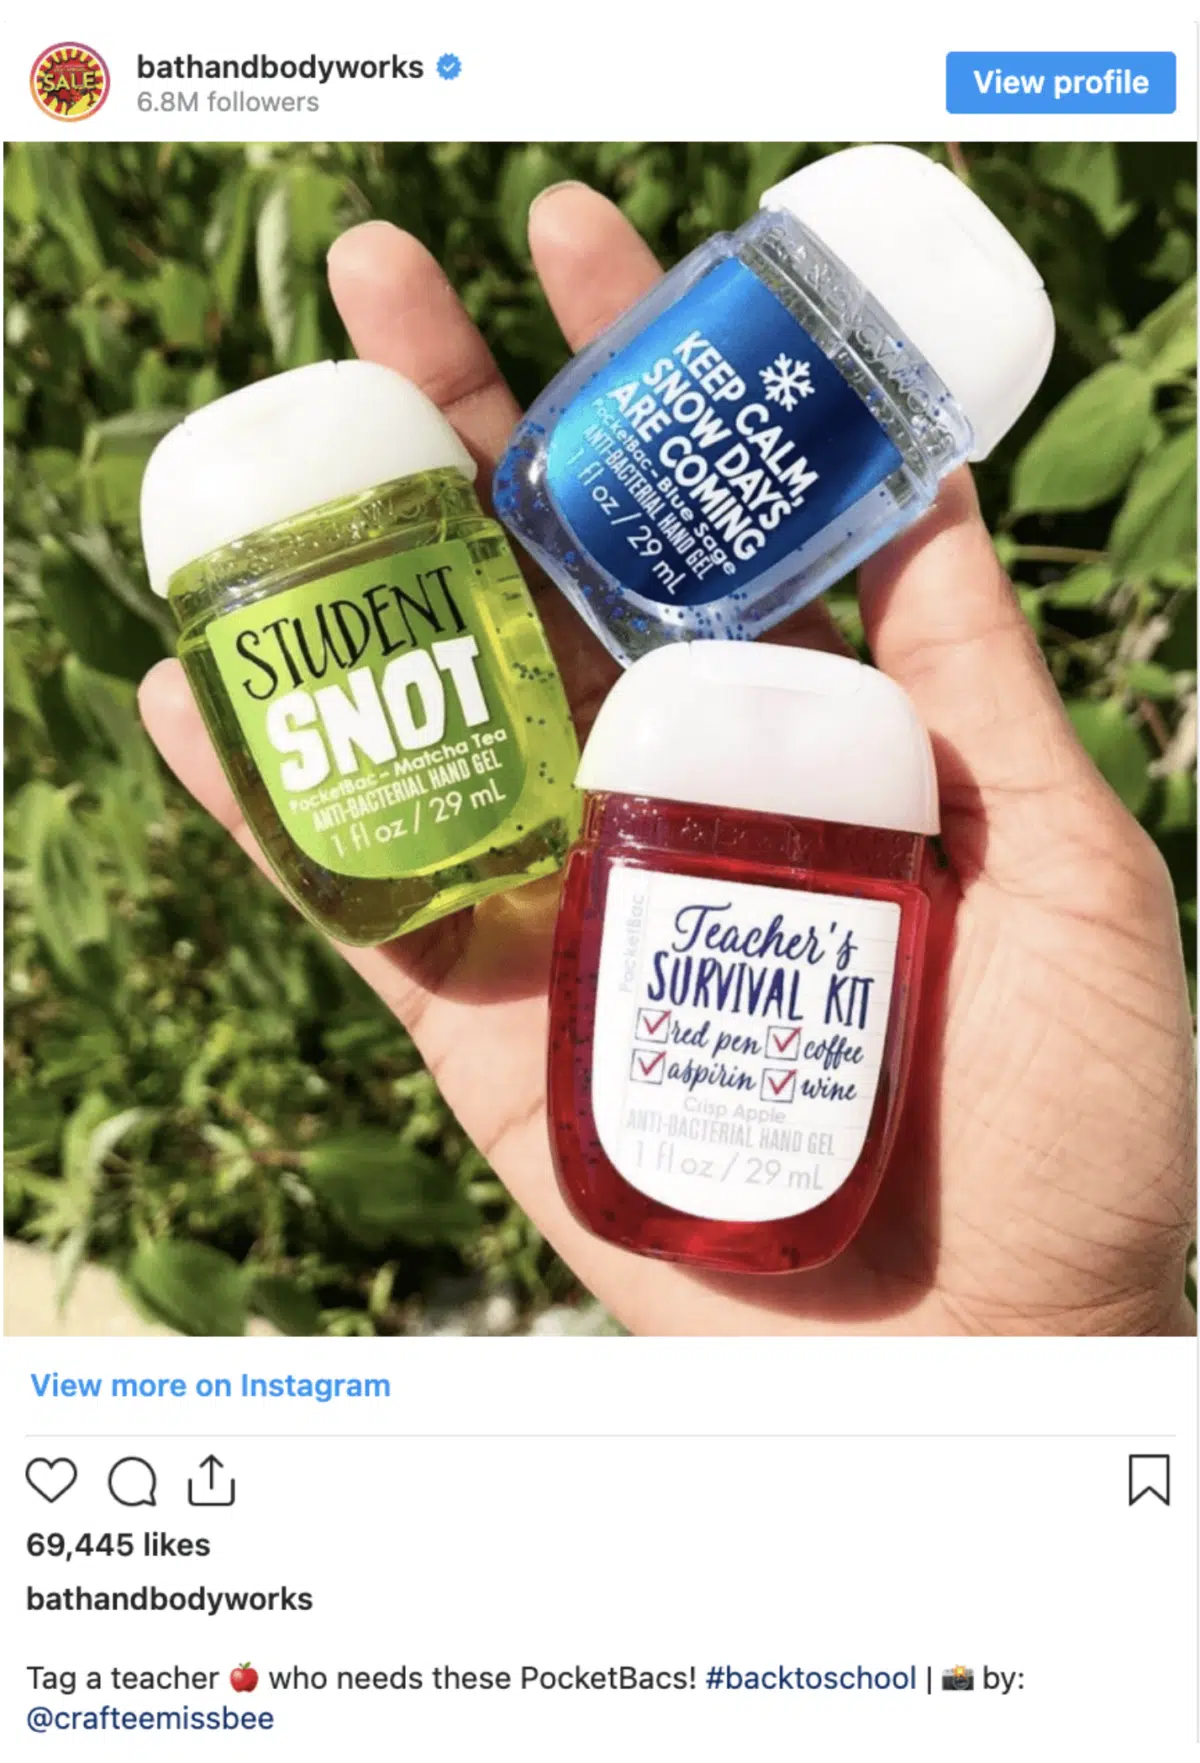 a Bath and Body works back-to-school campaign on Instagram for hand sanitizers